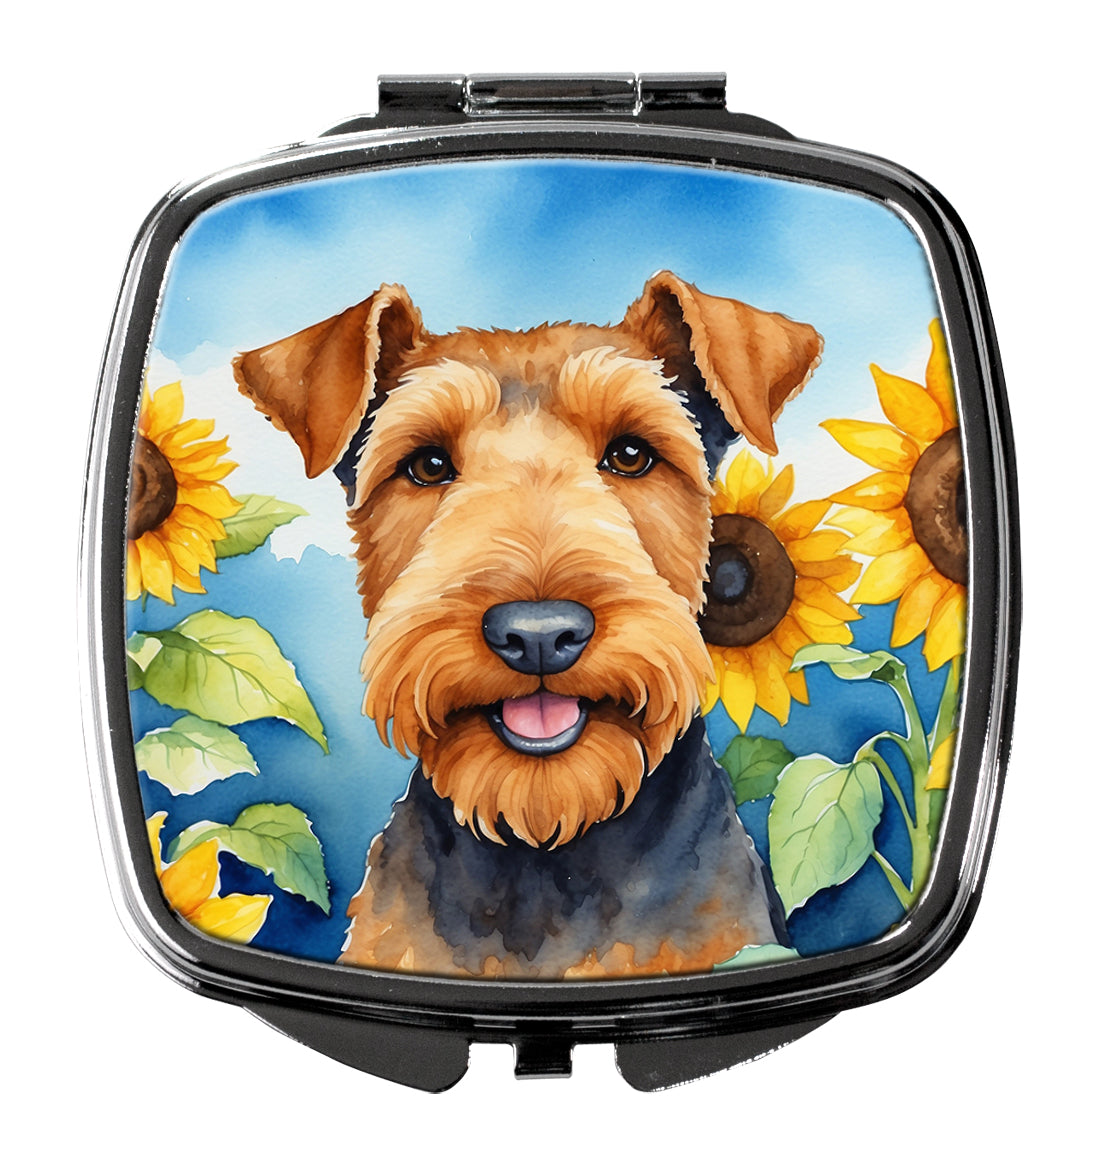 Buy this Airedale Terrier in Sunflowers Compact Mirror